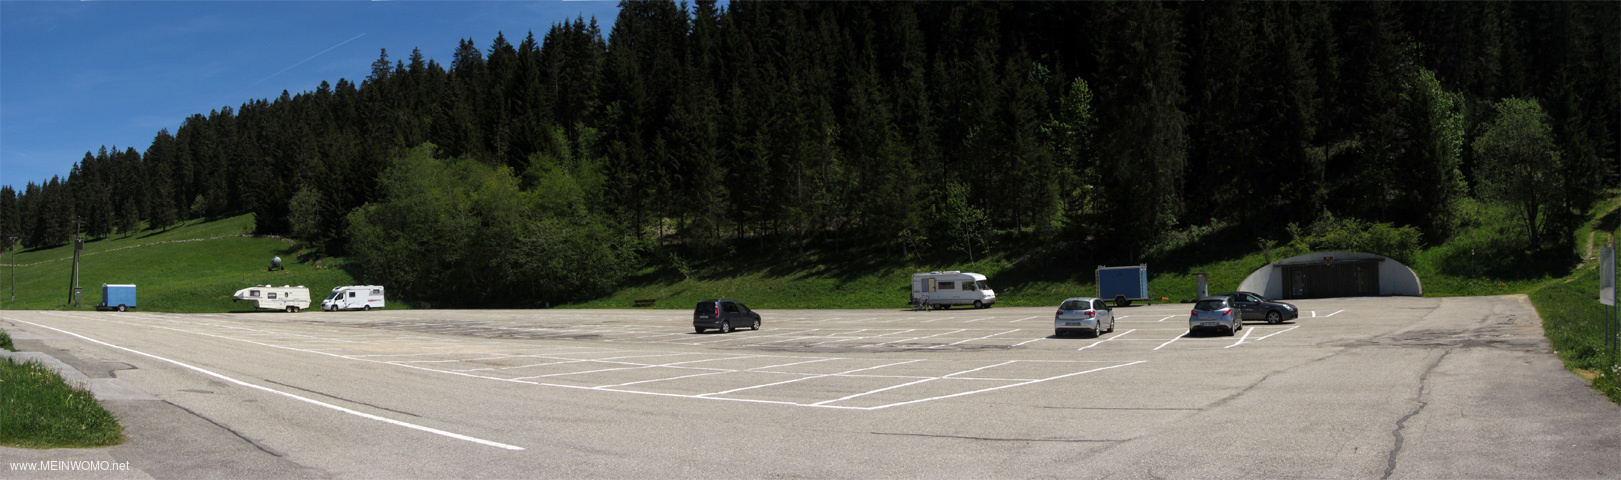  The huge parking for cars and RVs near the Lac des Taillres in La Brvine..  Right behind the toil ...